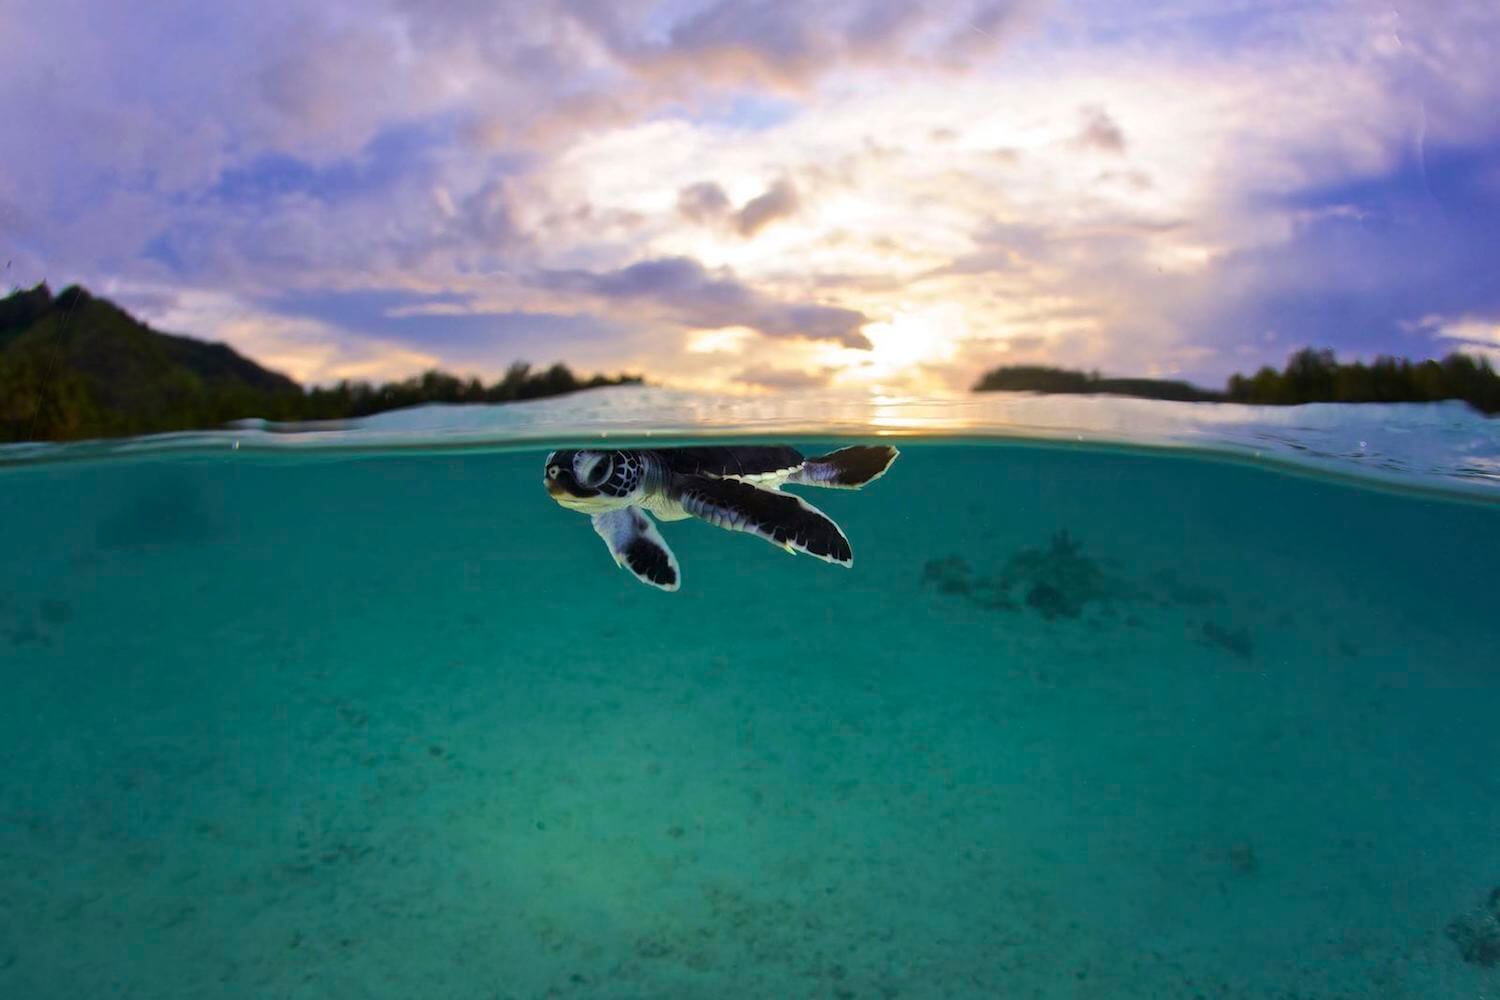 Small sea turtle, view from half underwater and half above water.